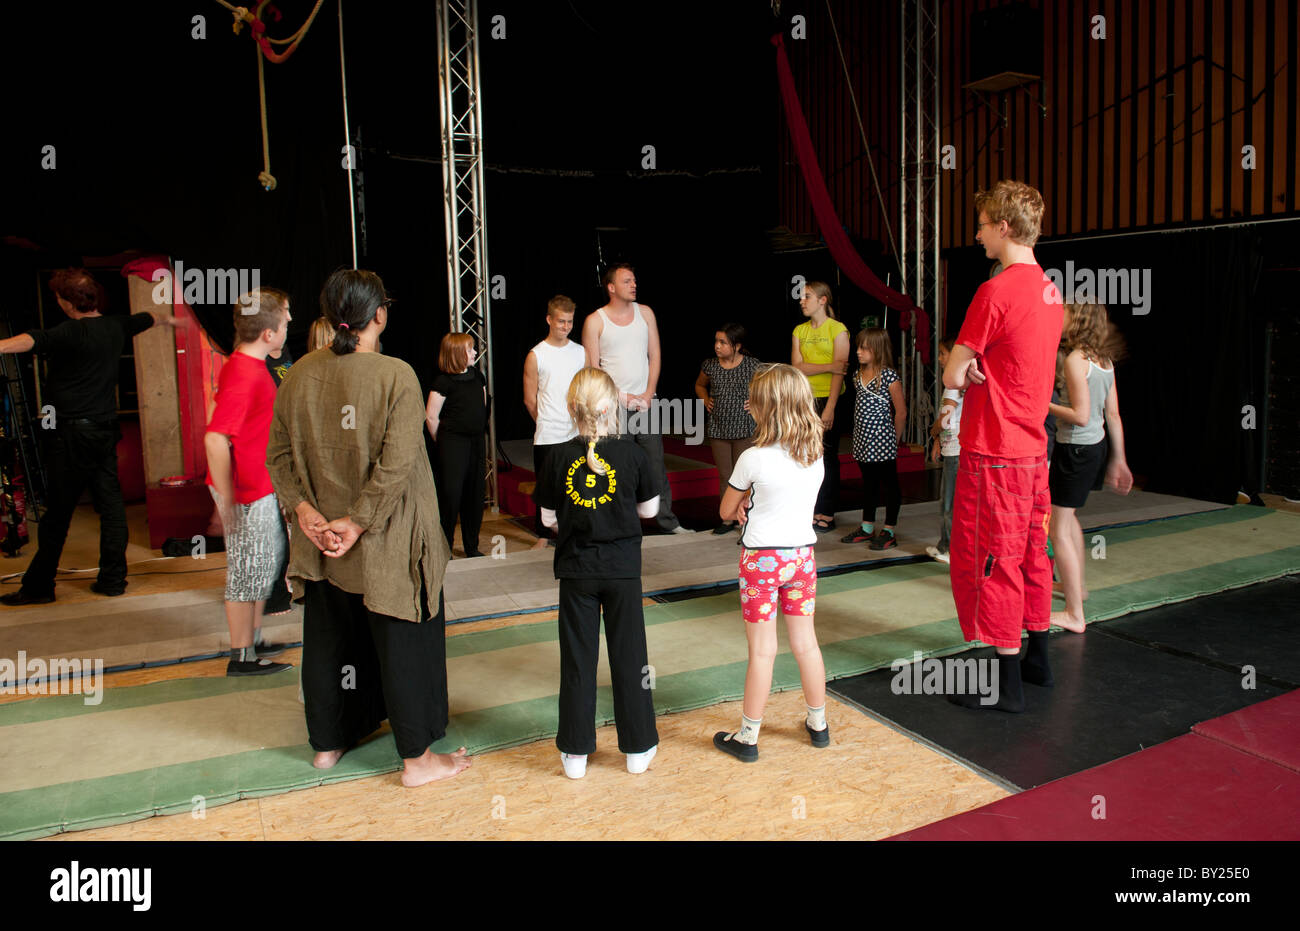 Inside children and teens school for Circus performers with teachers doing exercises and learning in Arnhem Netherlands Stock Photo